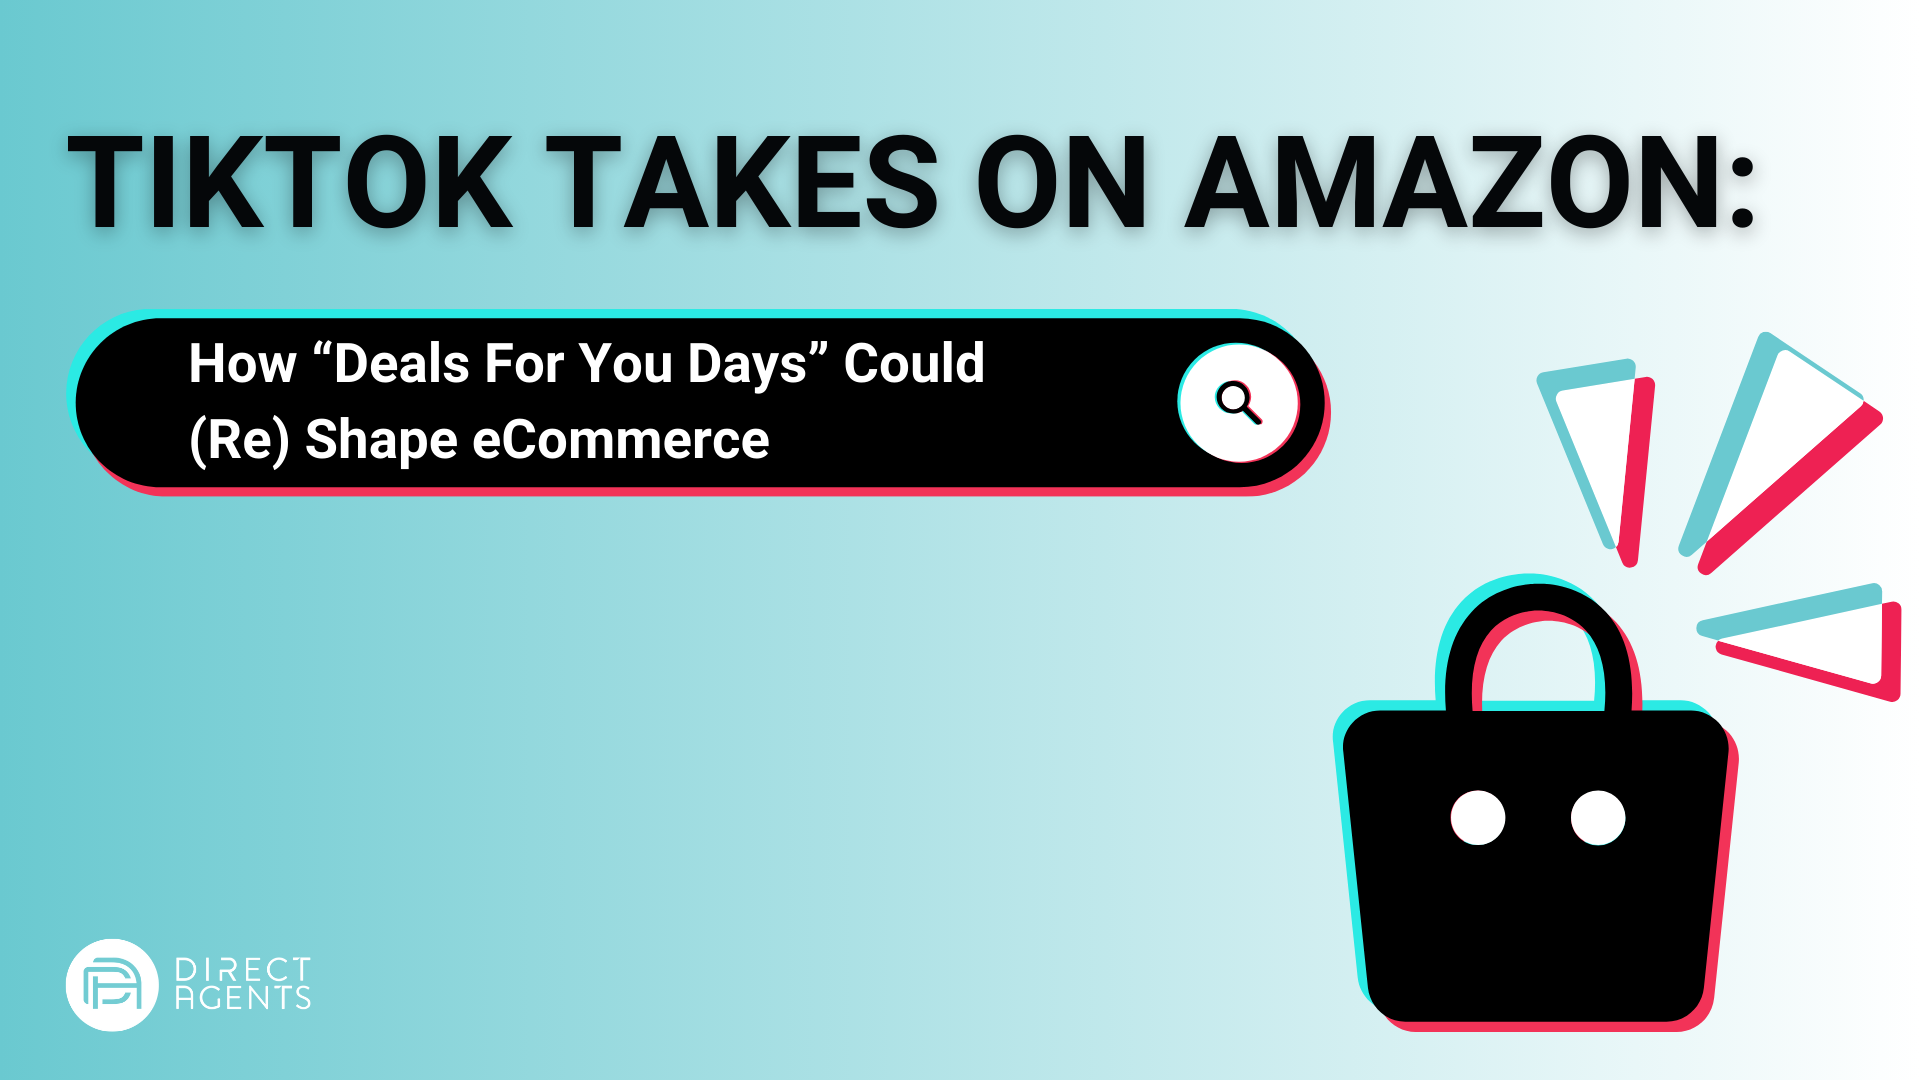 TikTok Takes on Amazon: How “Deals For You Days” Could (Re) Shape eCommerce